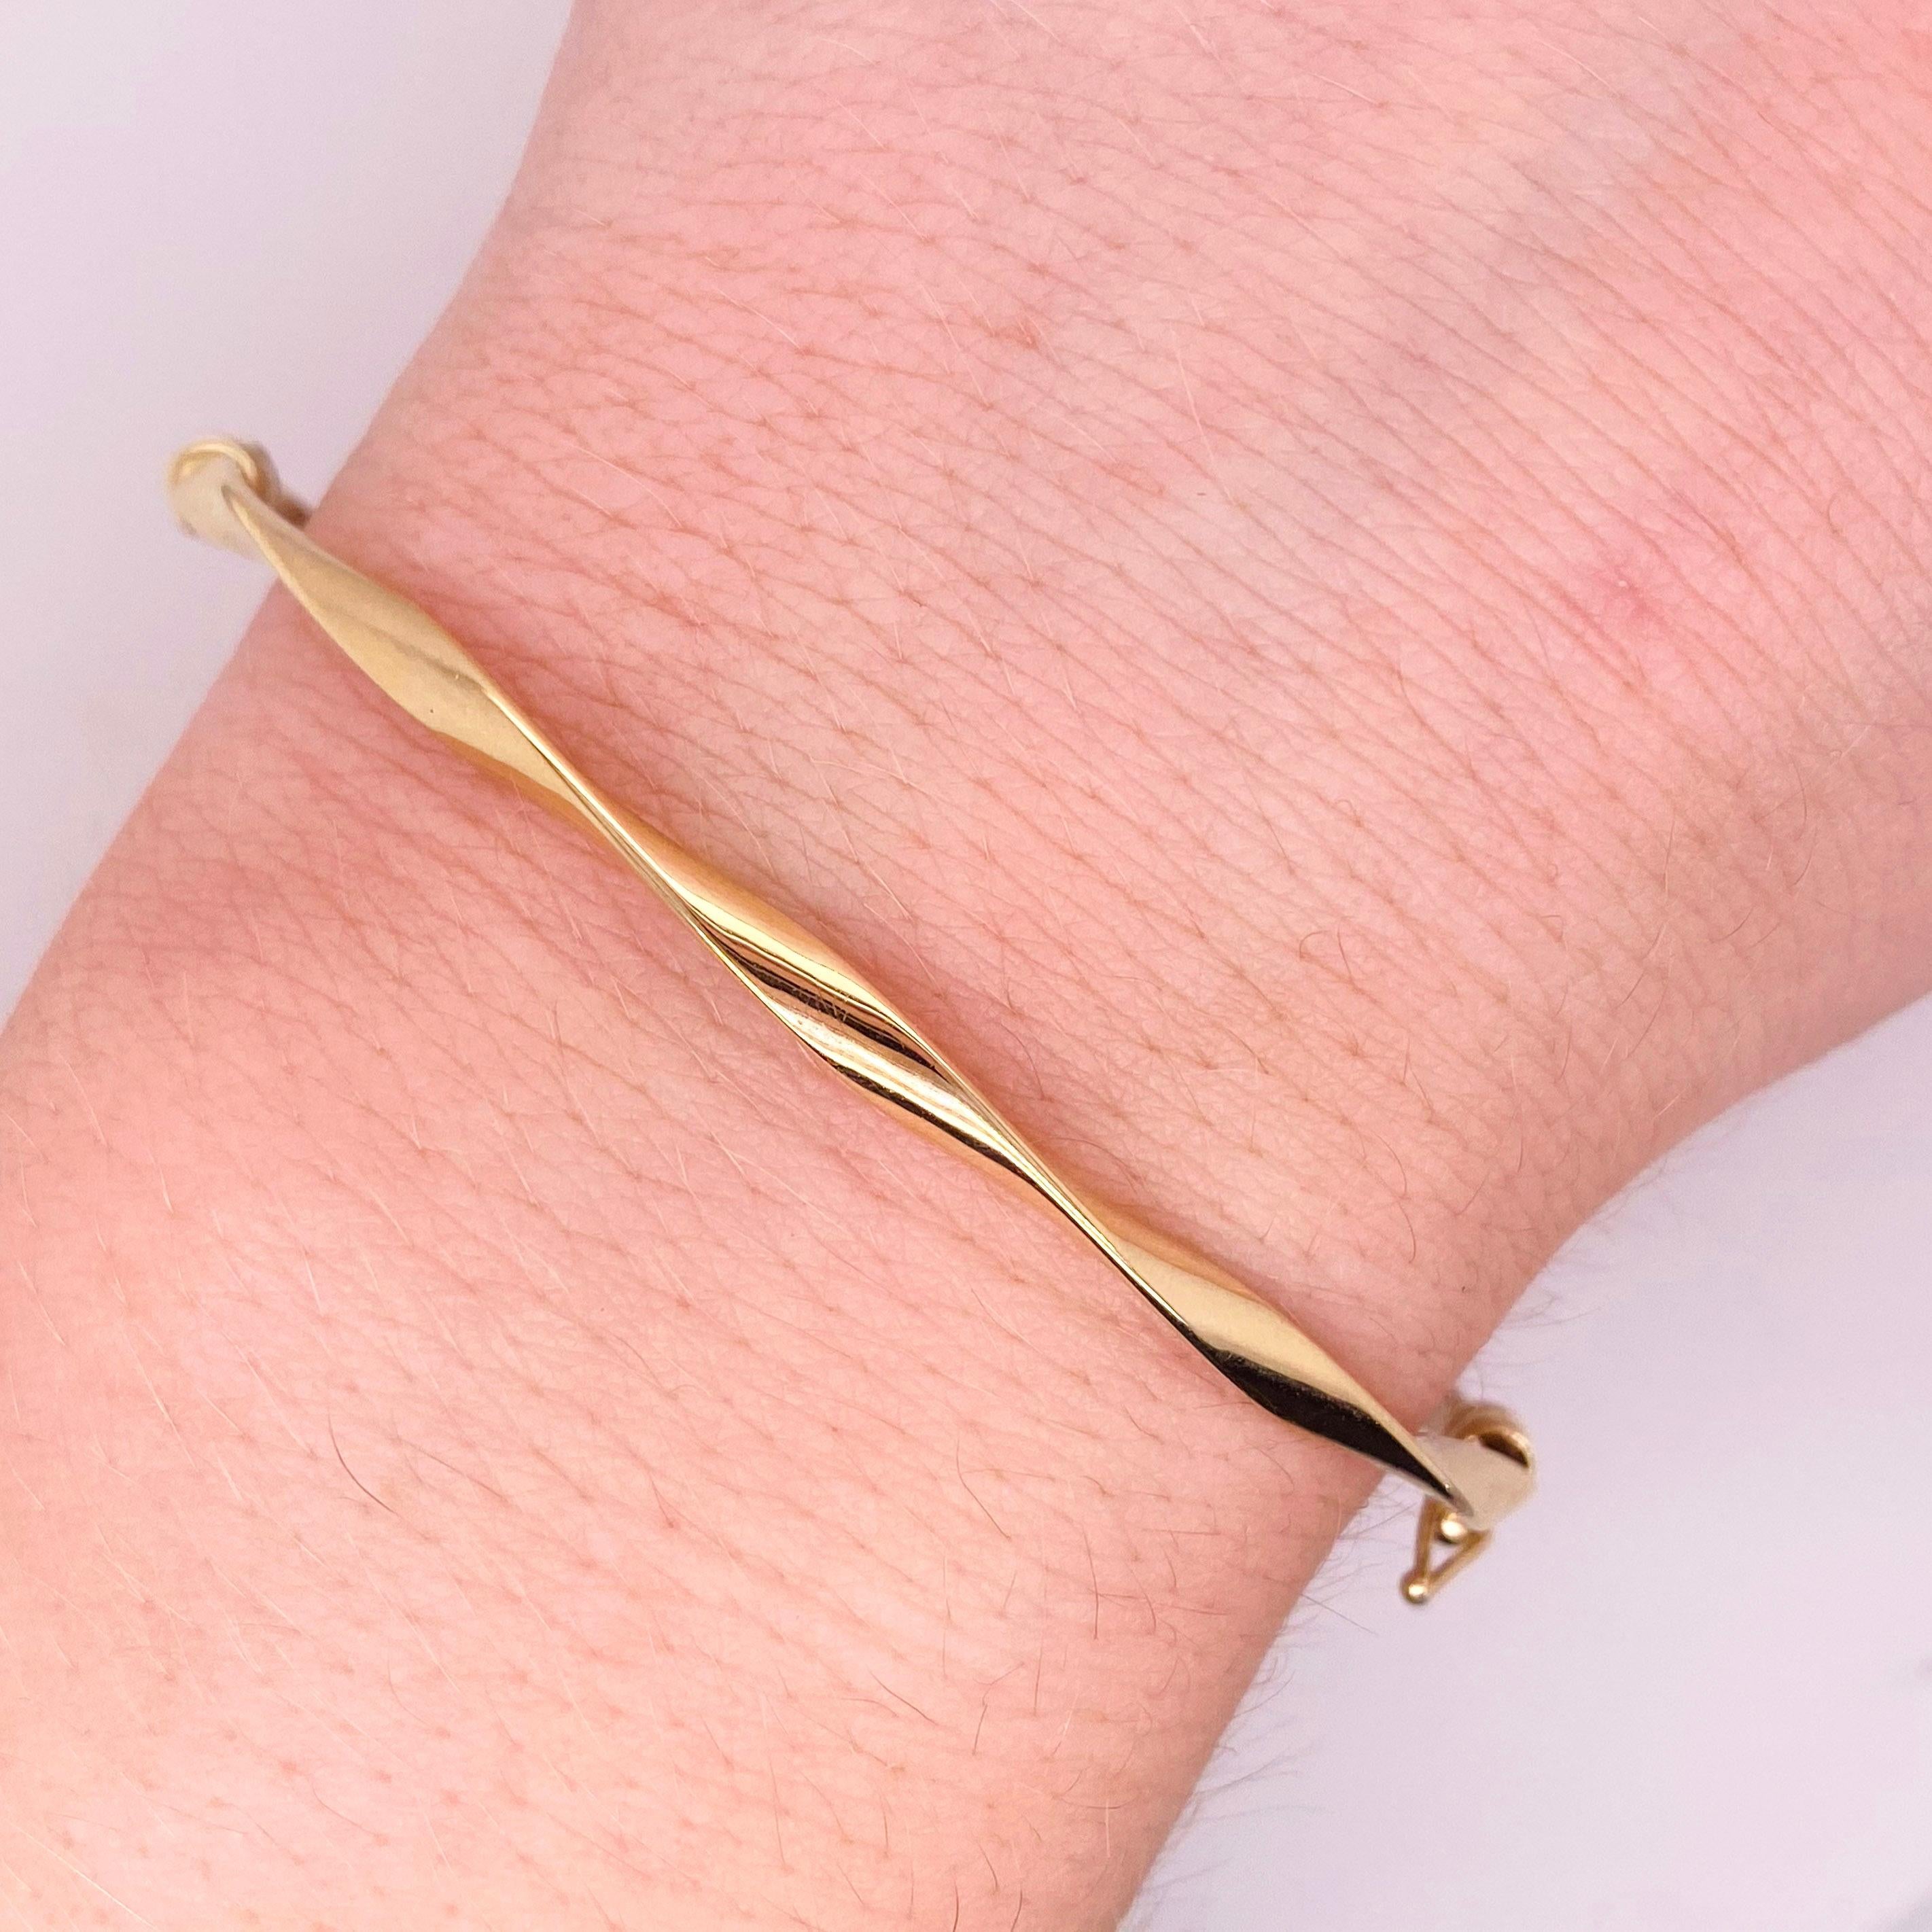 The twisted bangle bracelet is amazing! The details for this gorgeous bracelet are listed below:
Bracelet Type: Bangle with Safety Latch
Metal Quality: 14 Karat Yellow Gold
Circumference: 7.5 inches
Diameter: 2.25 x 2.5 inches
Width: 2.7